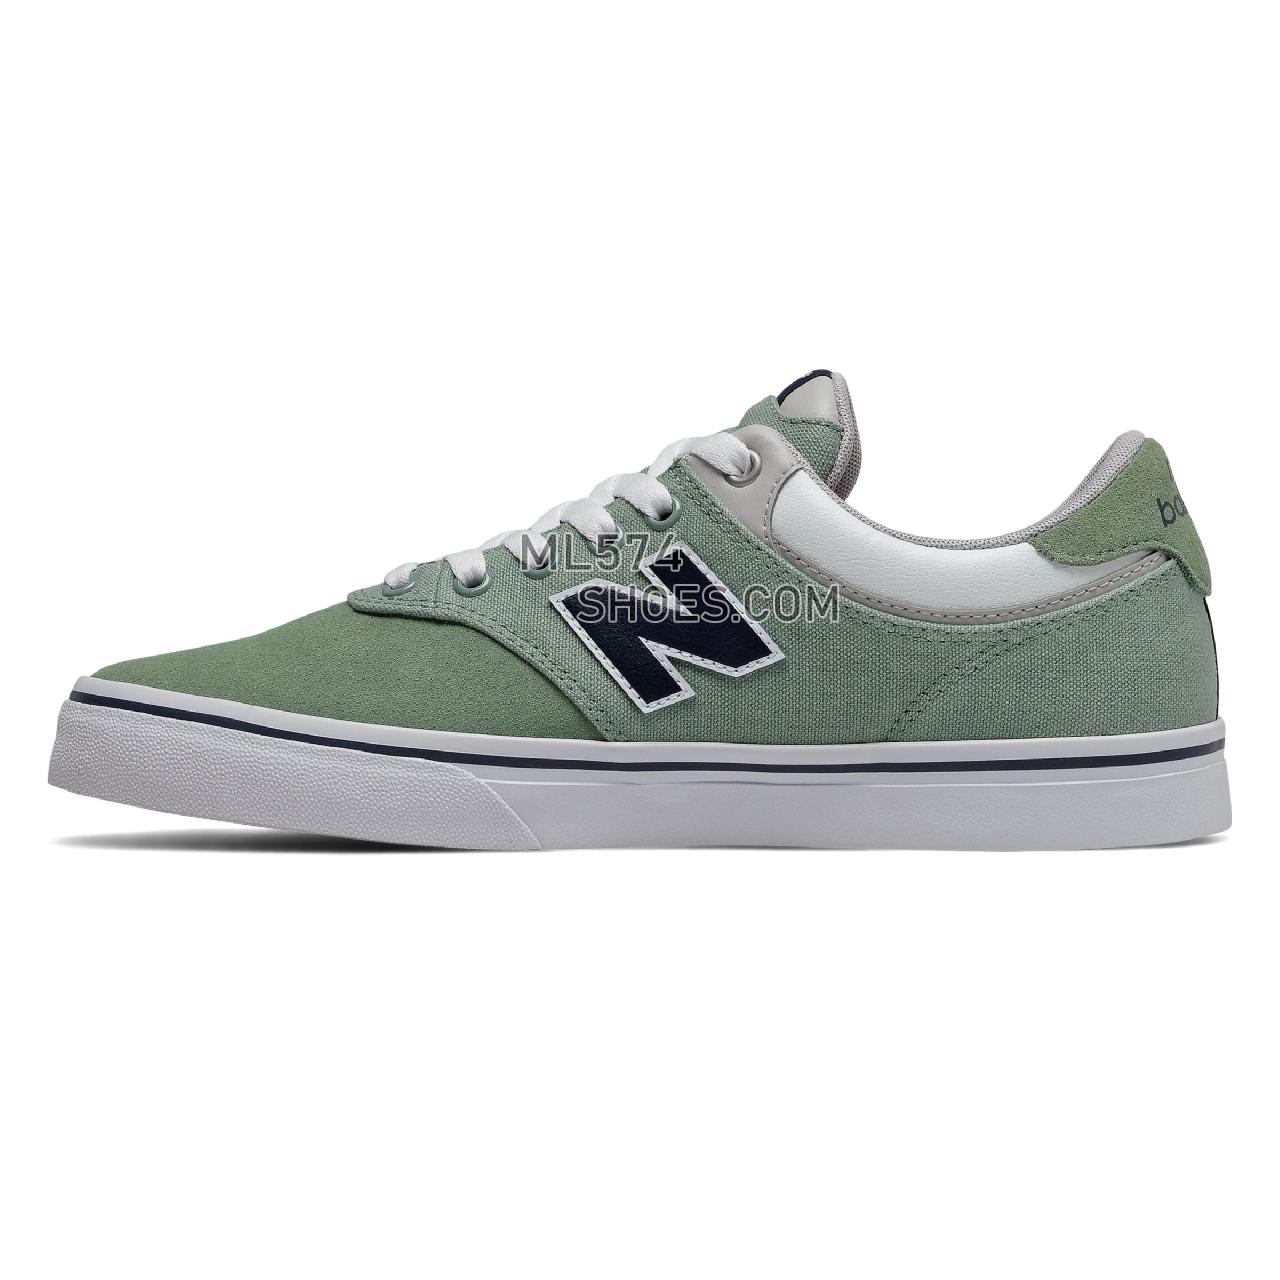 New Balance Numeric 255 - Men's NB Numeric Skate - Sage with Navy - NM255SGE